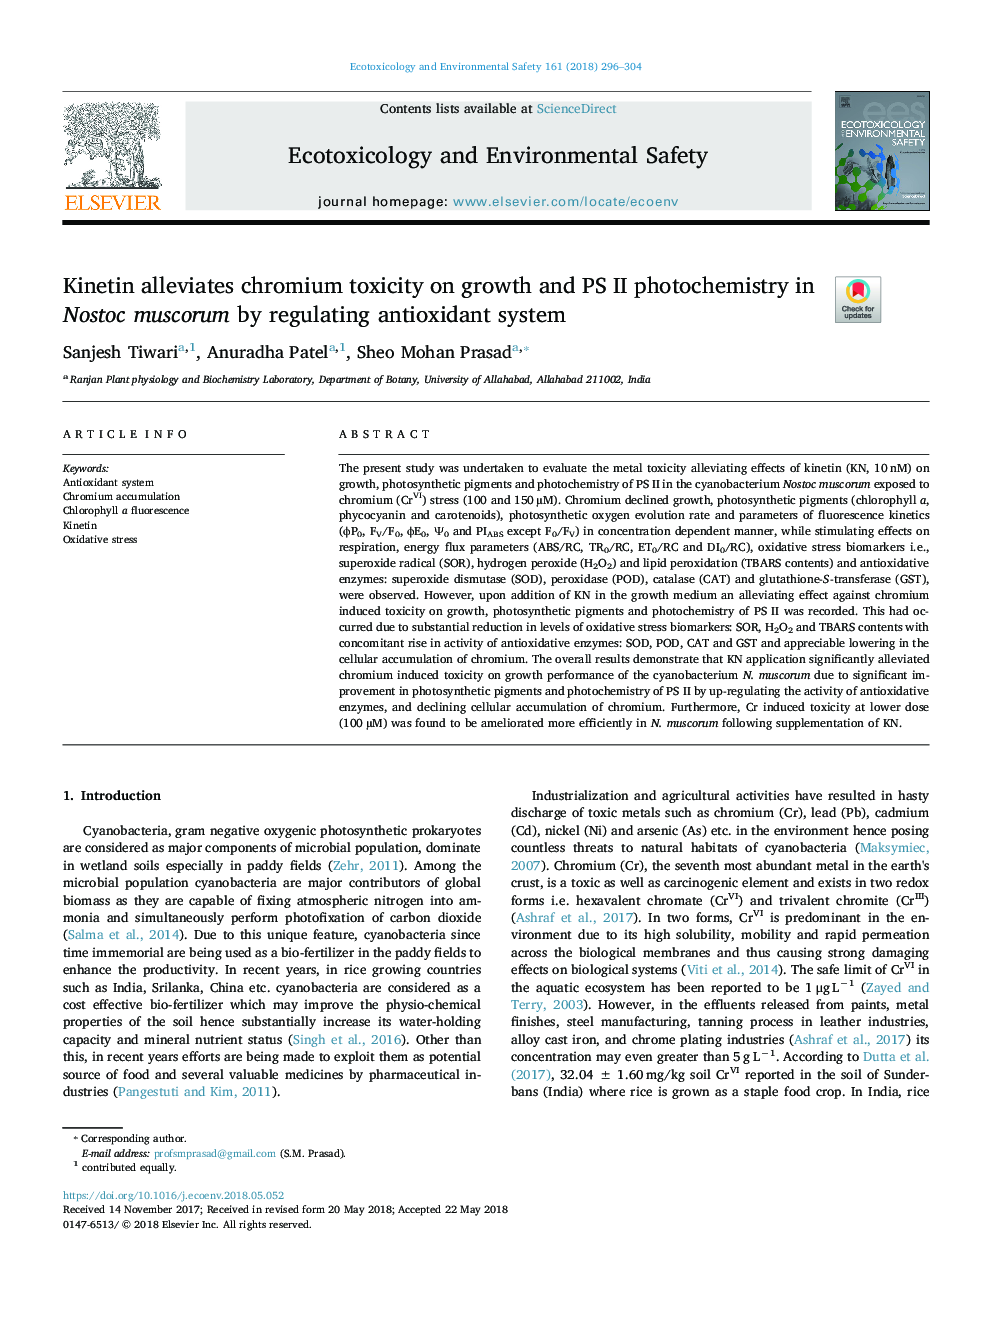 Kinetin alleviates chromium toxicity on growth and PS II photochemistry in Nostoc muscorum by regulating antioxidant system